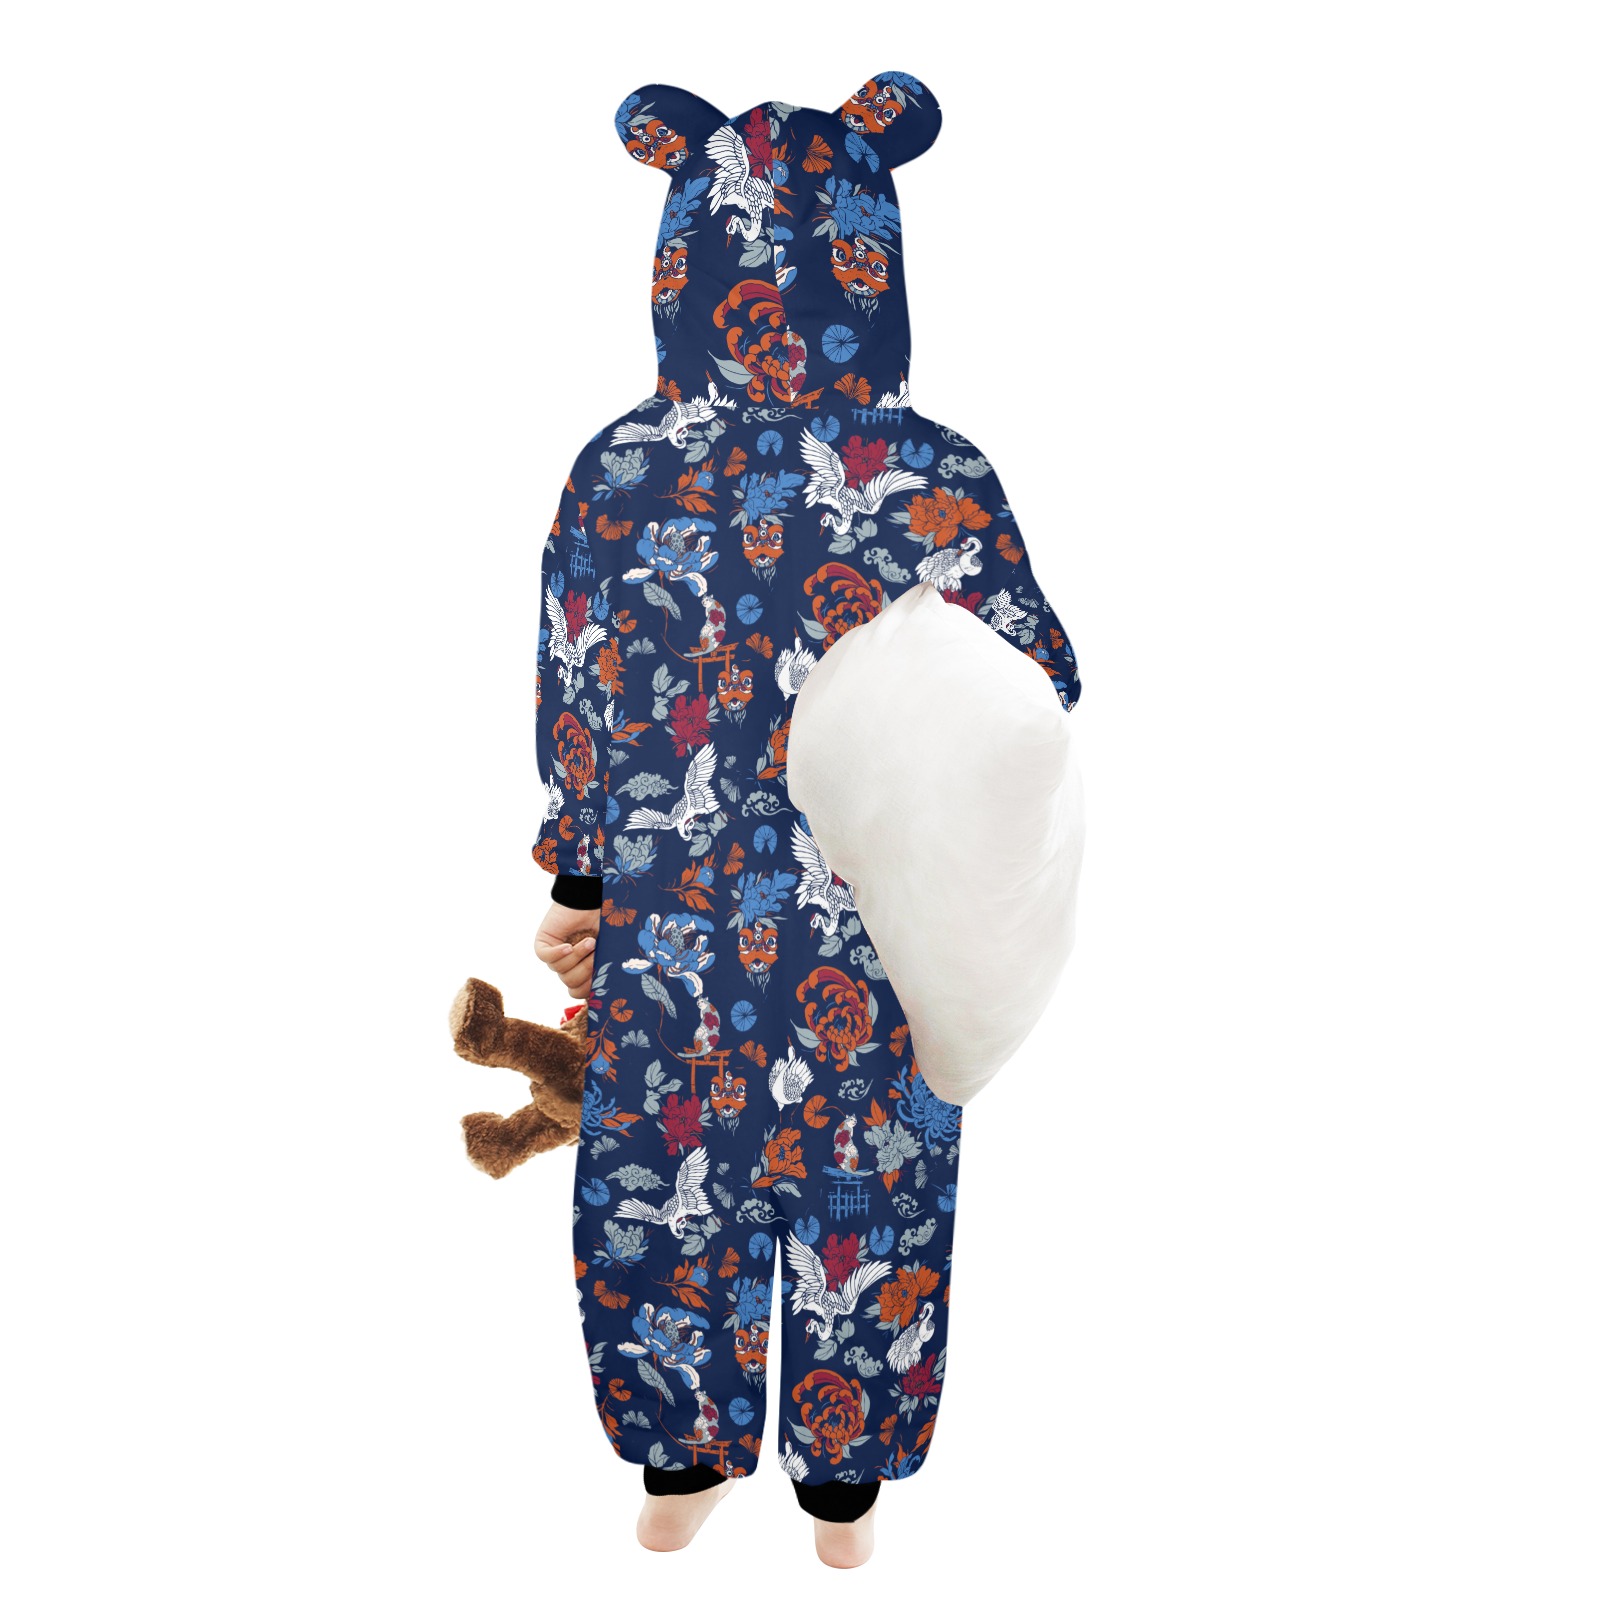 Florid dark asian nature One-Piece Zip up Hooded Pajamas for Little Kids